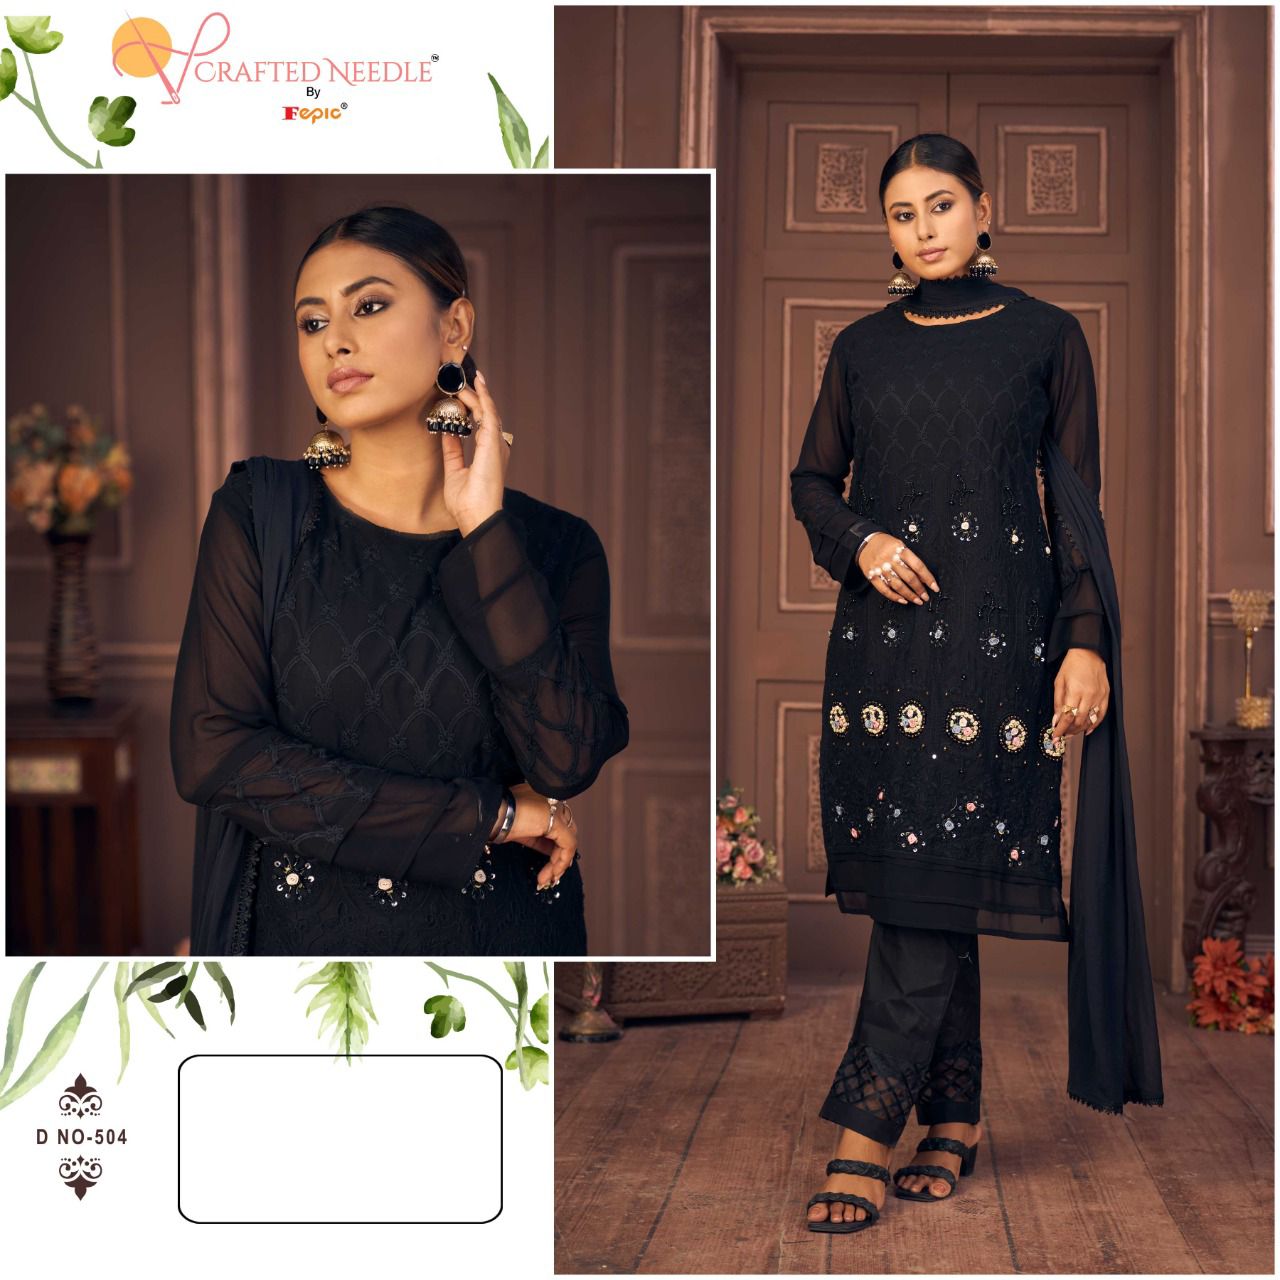 fepic crafted needle d no cn 504 georgette astonishing look kurti pant with dupattat catalog